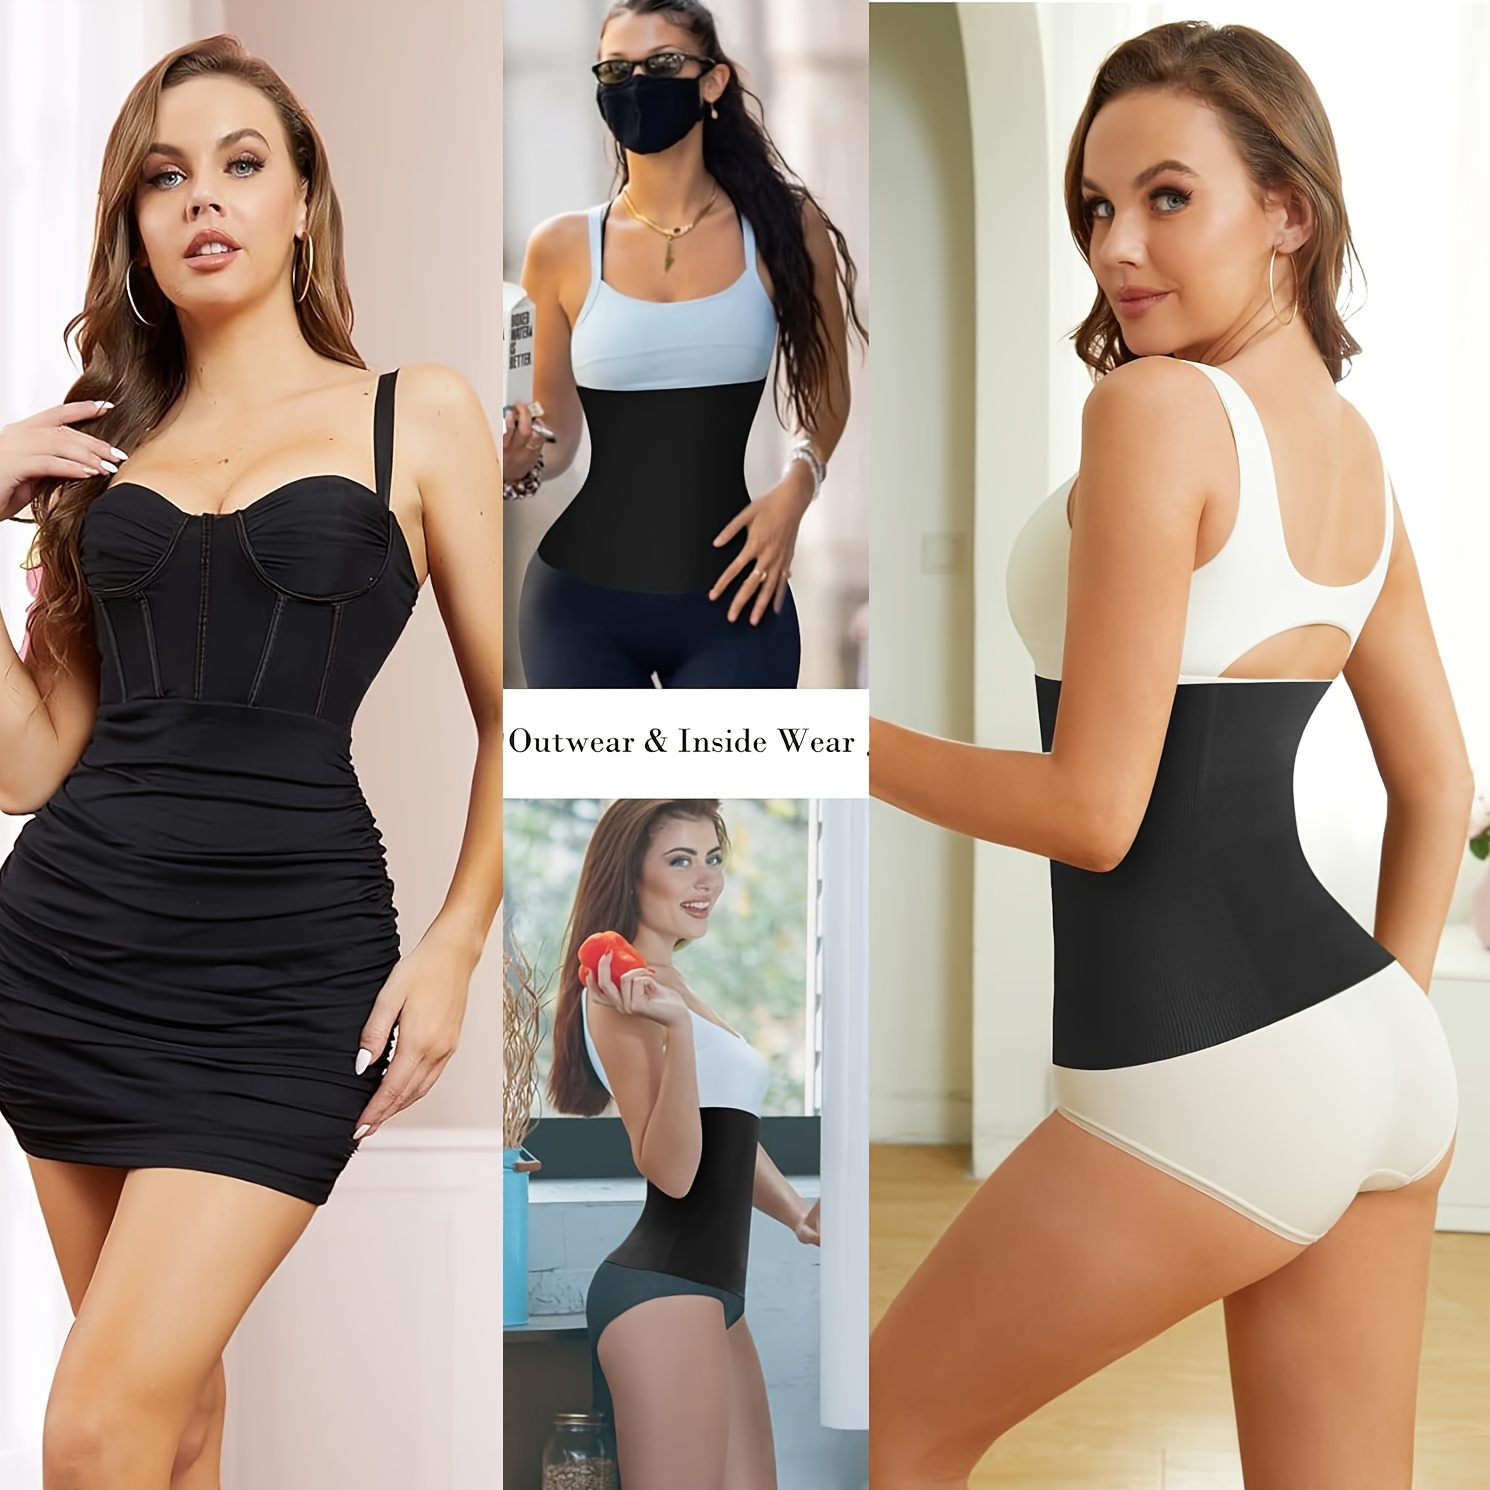 MiiOW Waist Trainer Corset For Women Tummy Control Takealot Slimming Belt  With Weight Loss Modeling Strap And Wasit Wrap Fajas 221013 From Nian06,  $12.37